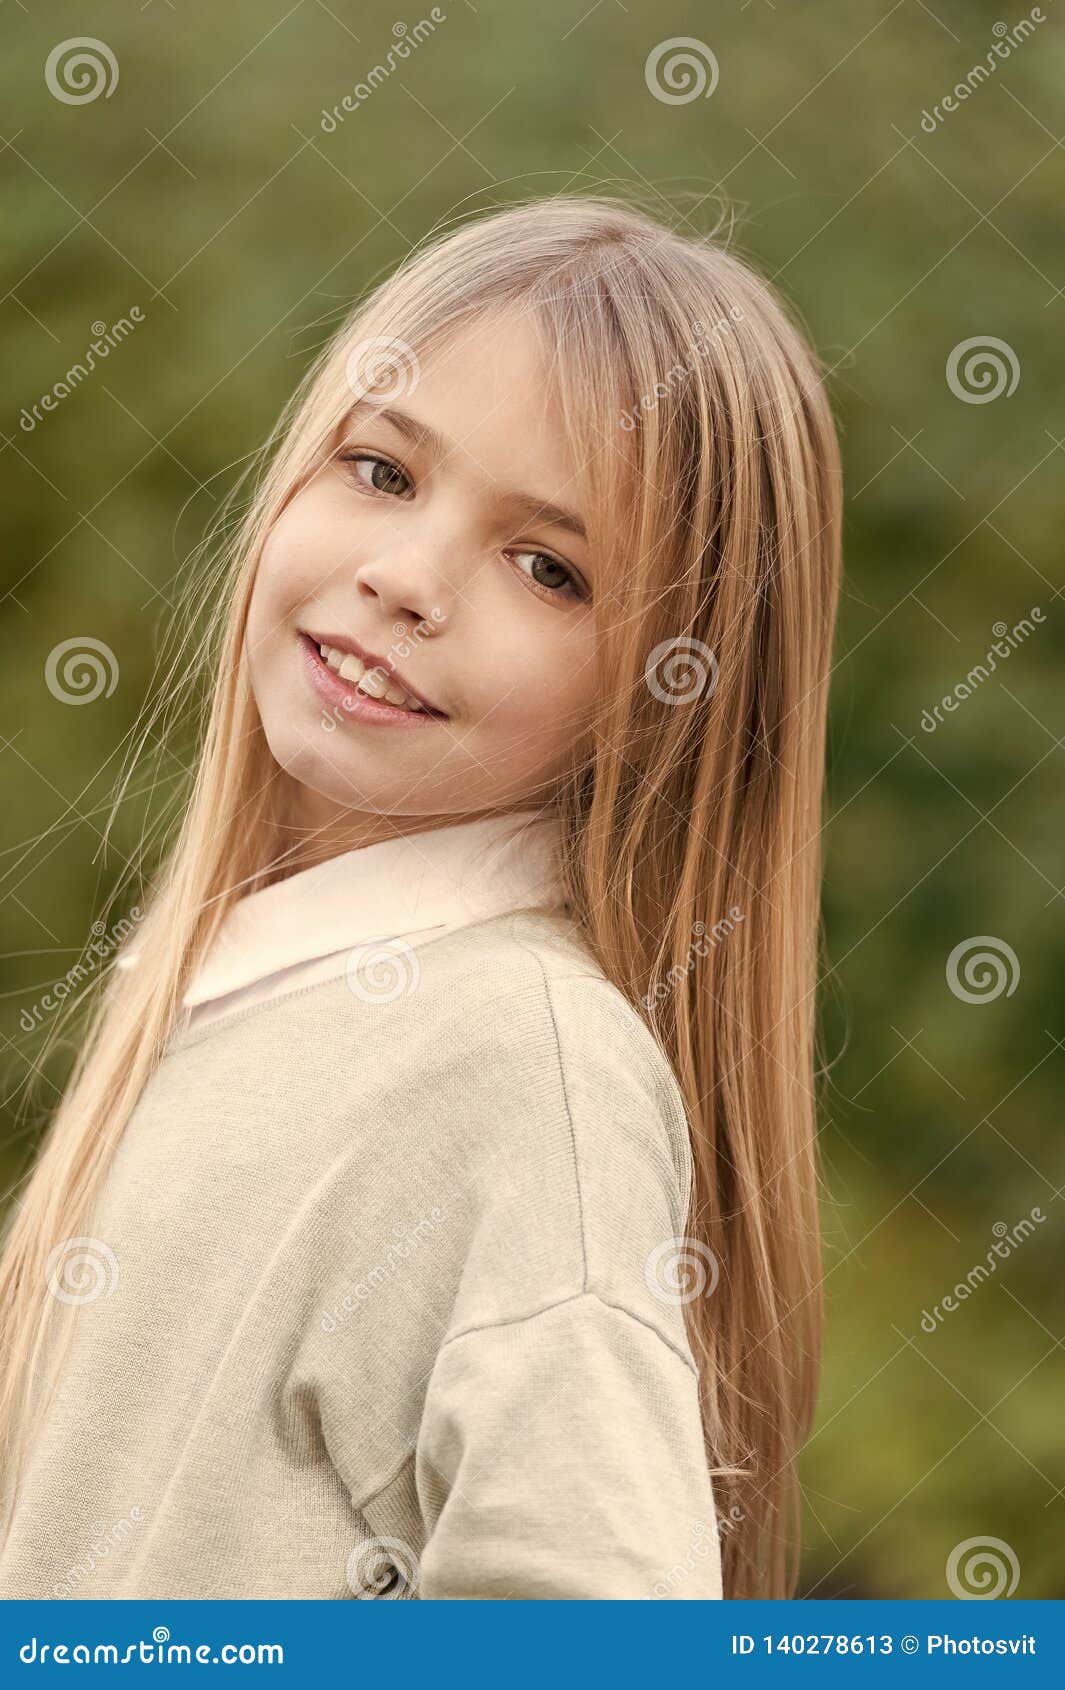 Little Girl Smile With Long Blond Hair Child With Cute Face Out